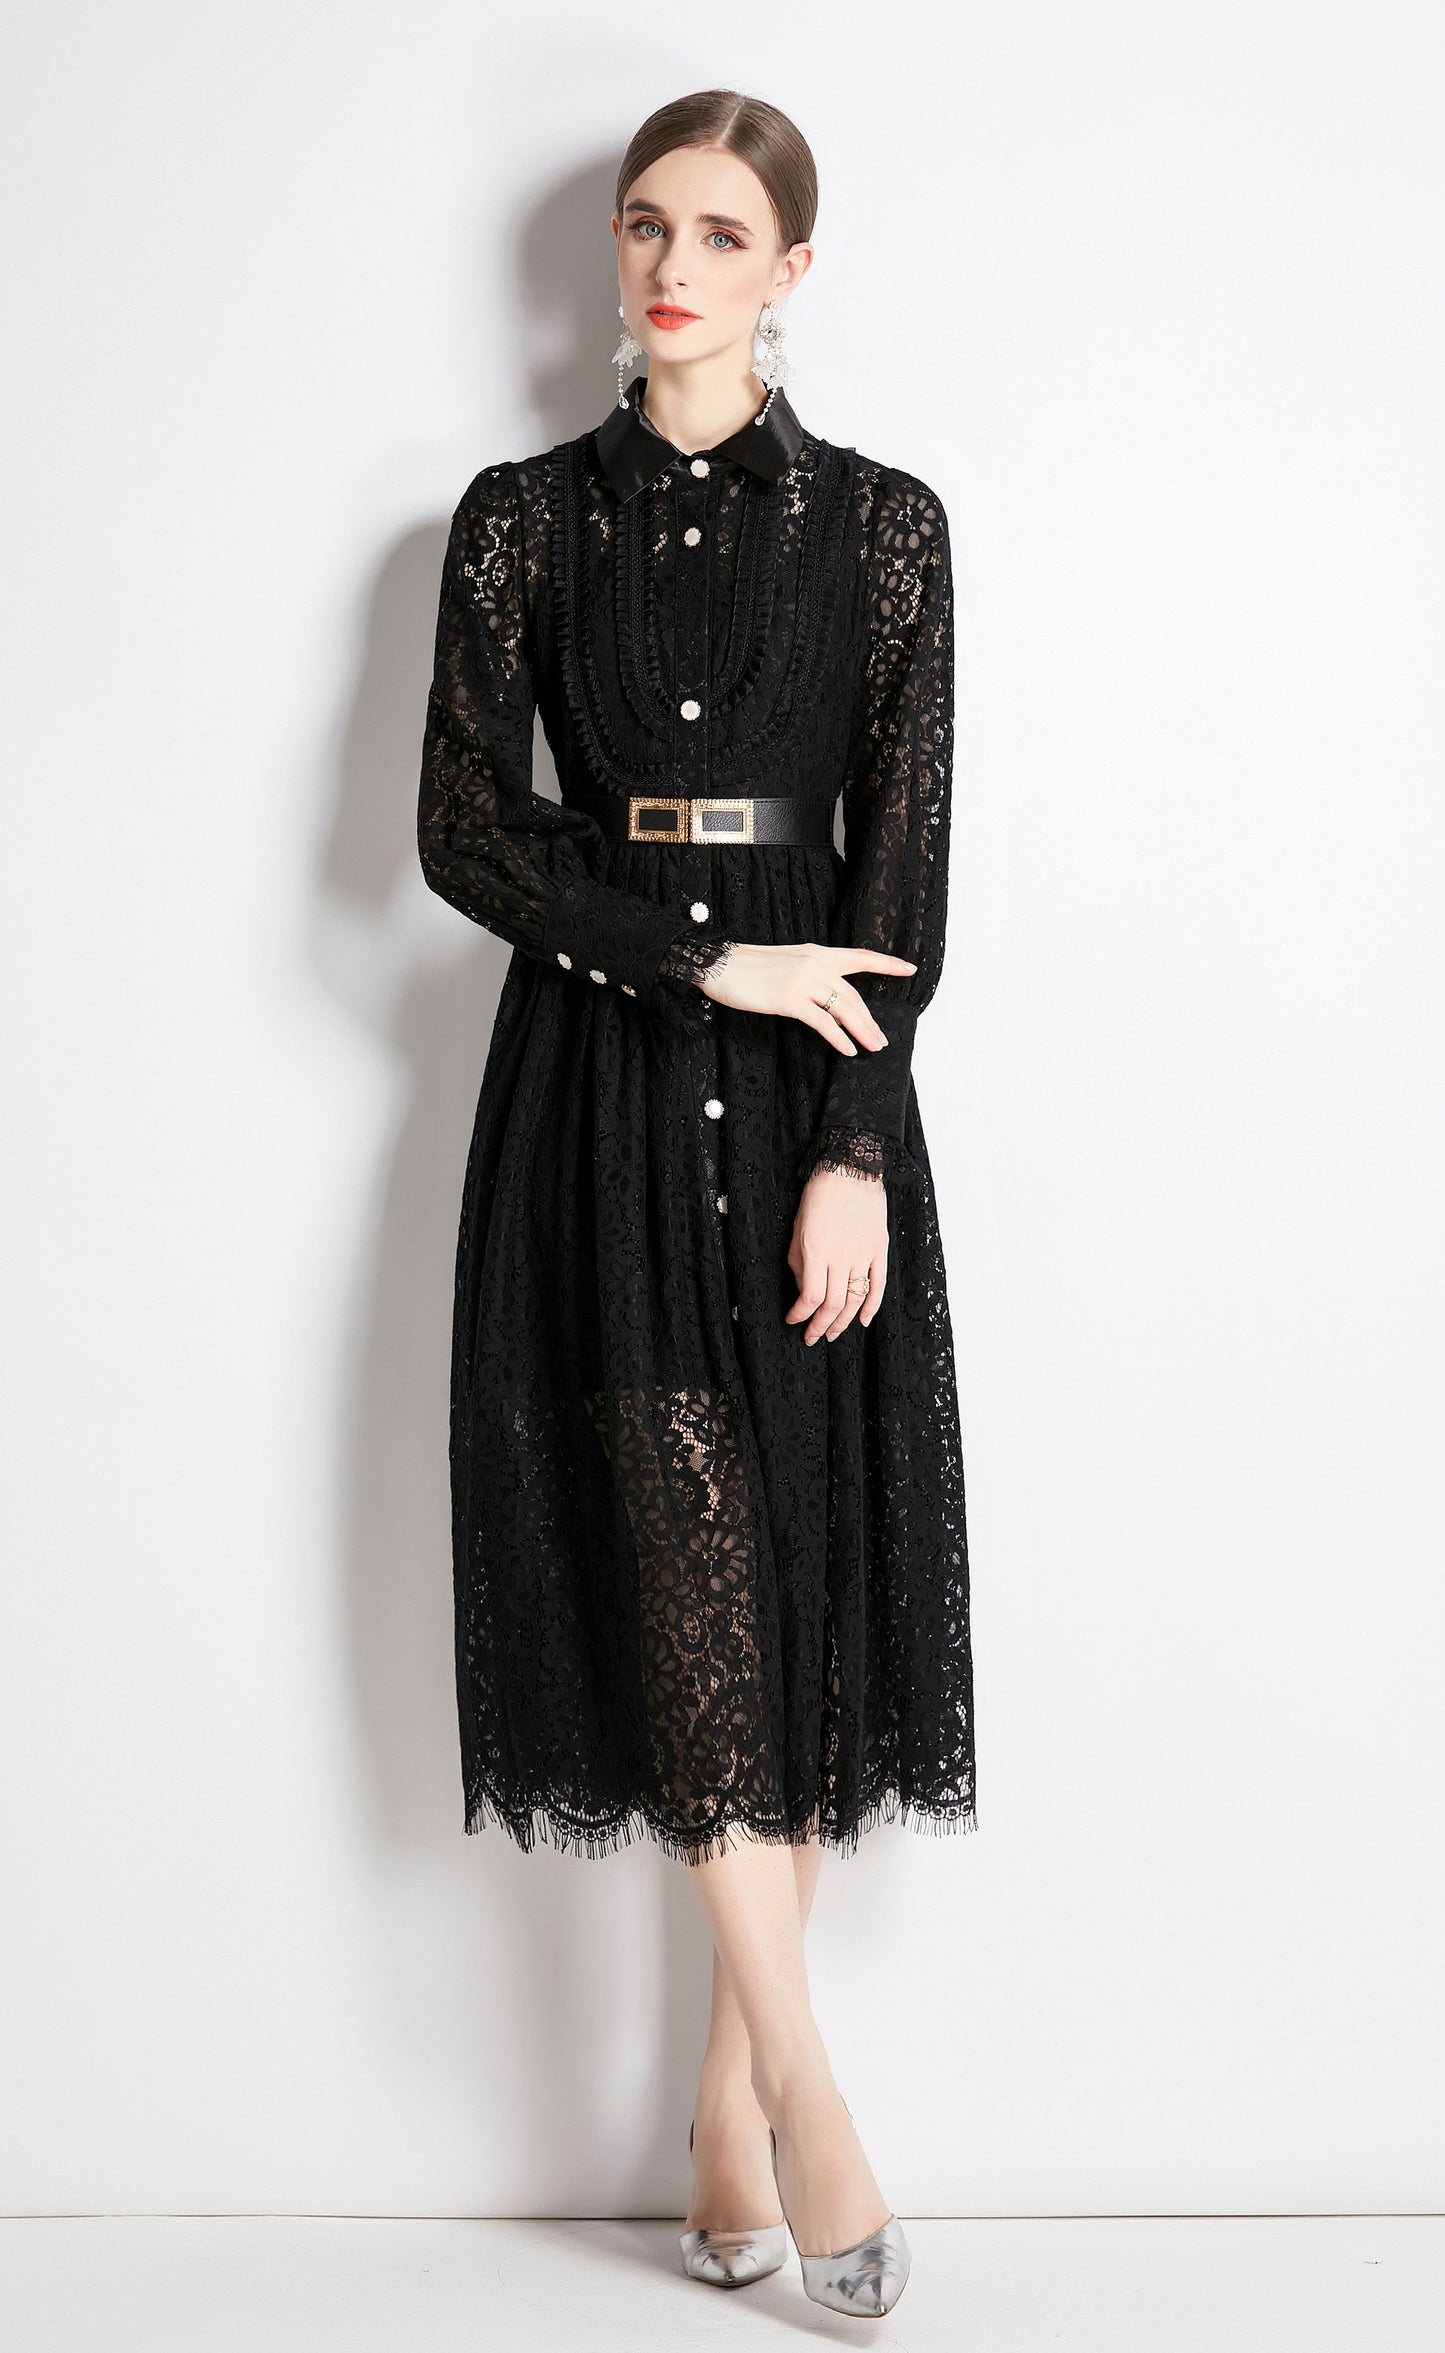 Black Collared Neck Long Sleeve Button Up Lace Midi Dress With Belt